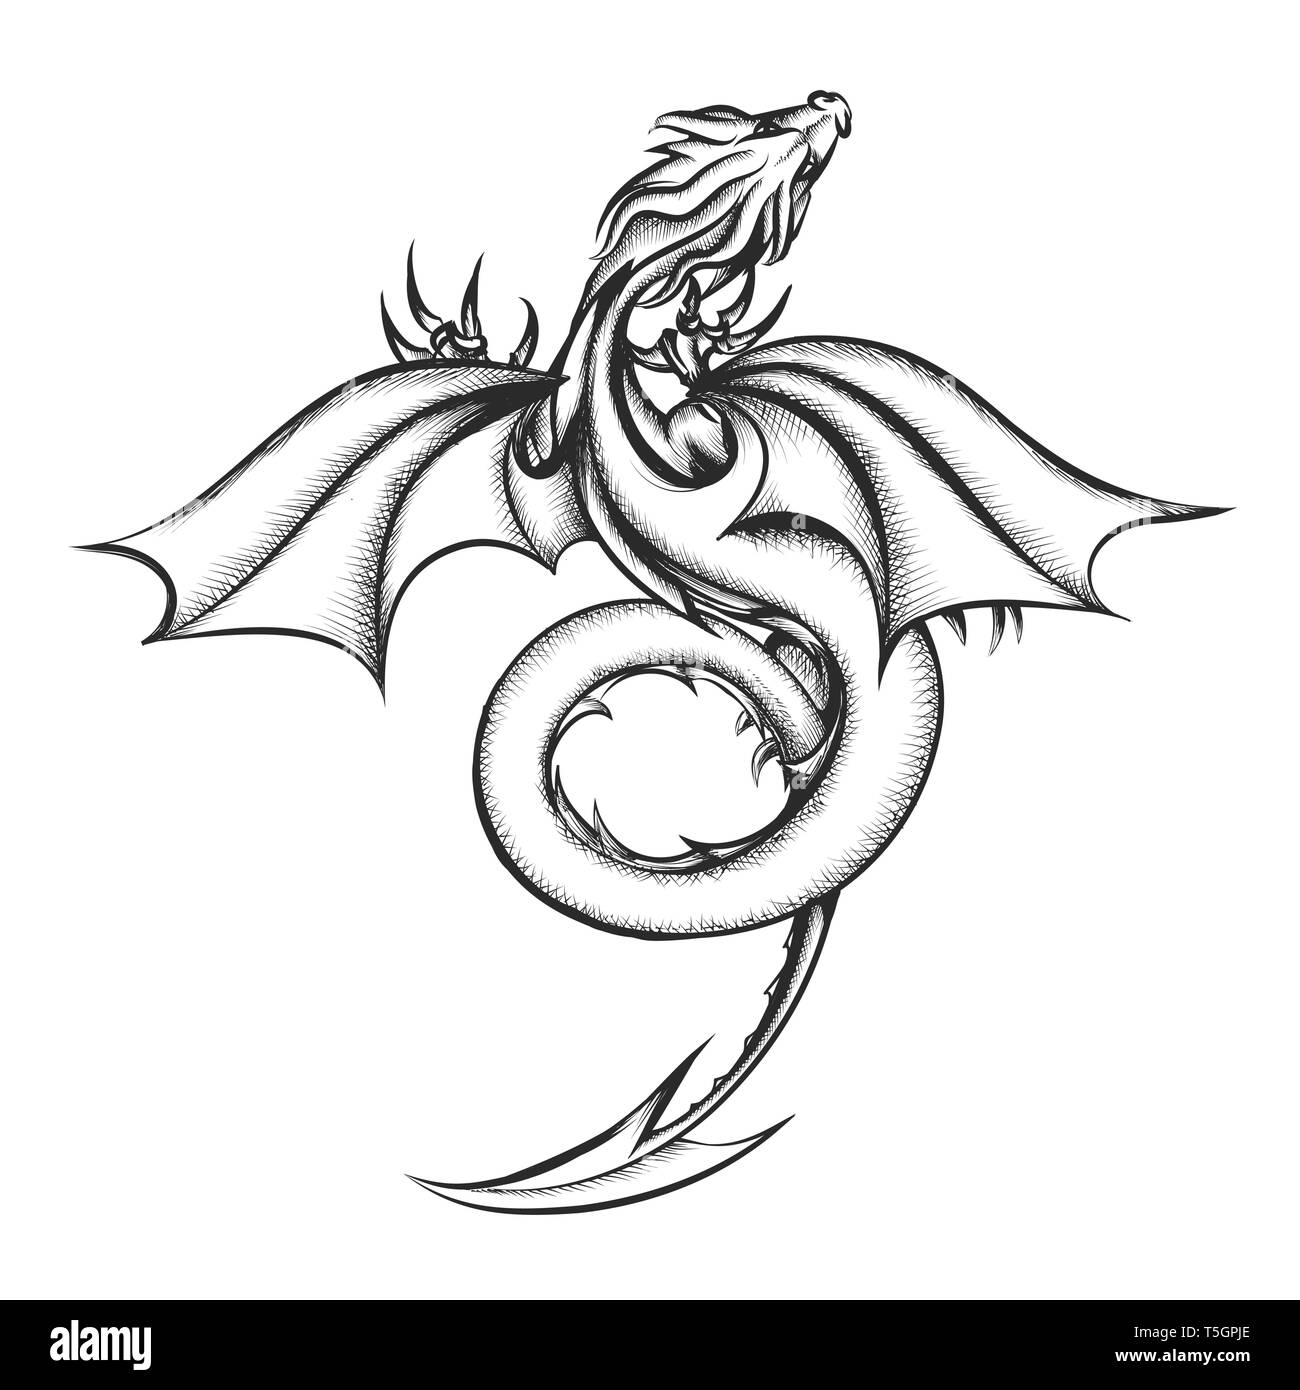 Dragon drawn in engraving style inspired by George Martin books.  Vector iillustration. Stock Vector